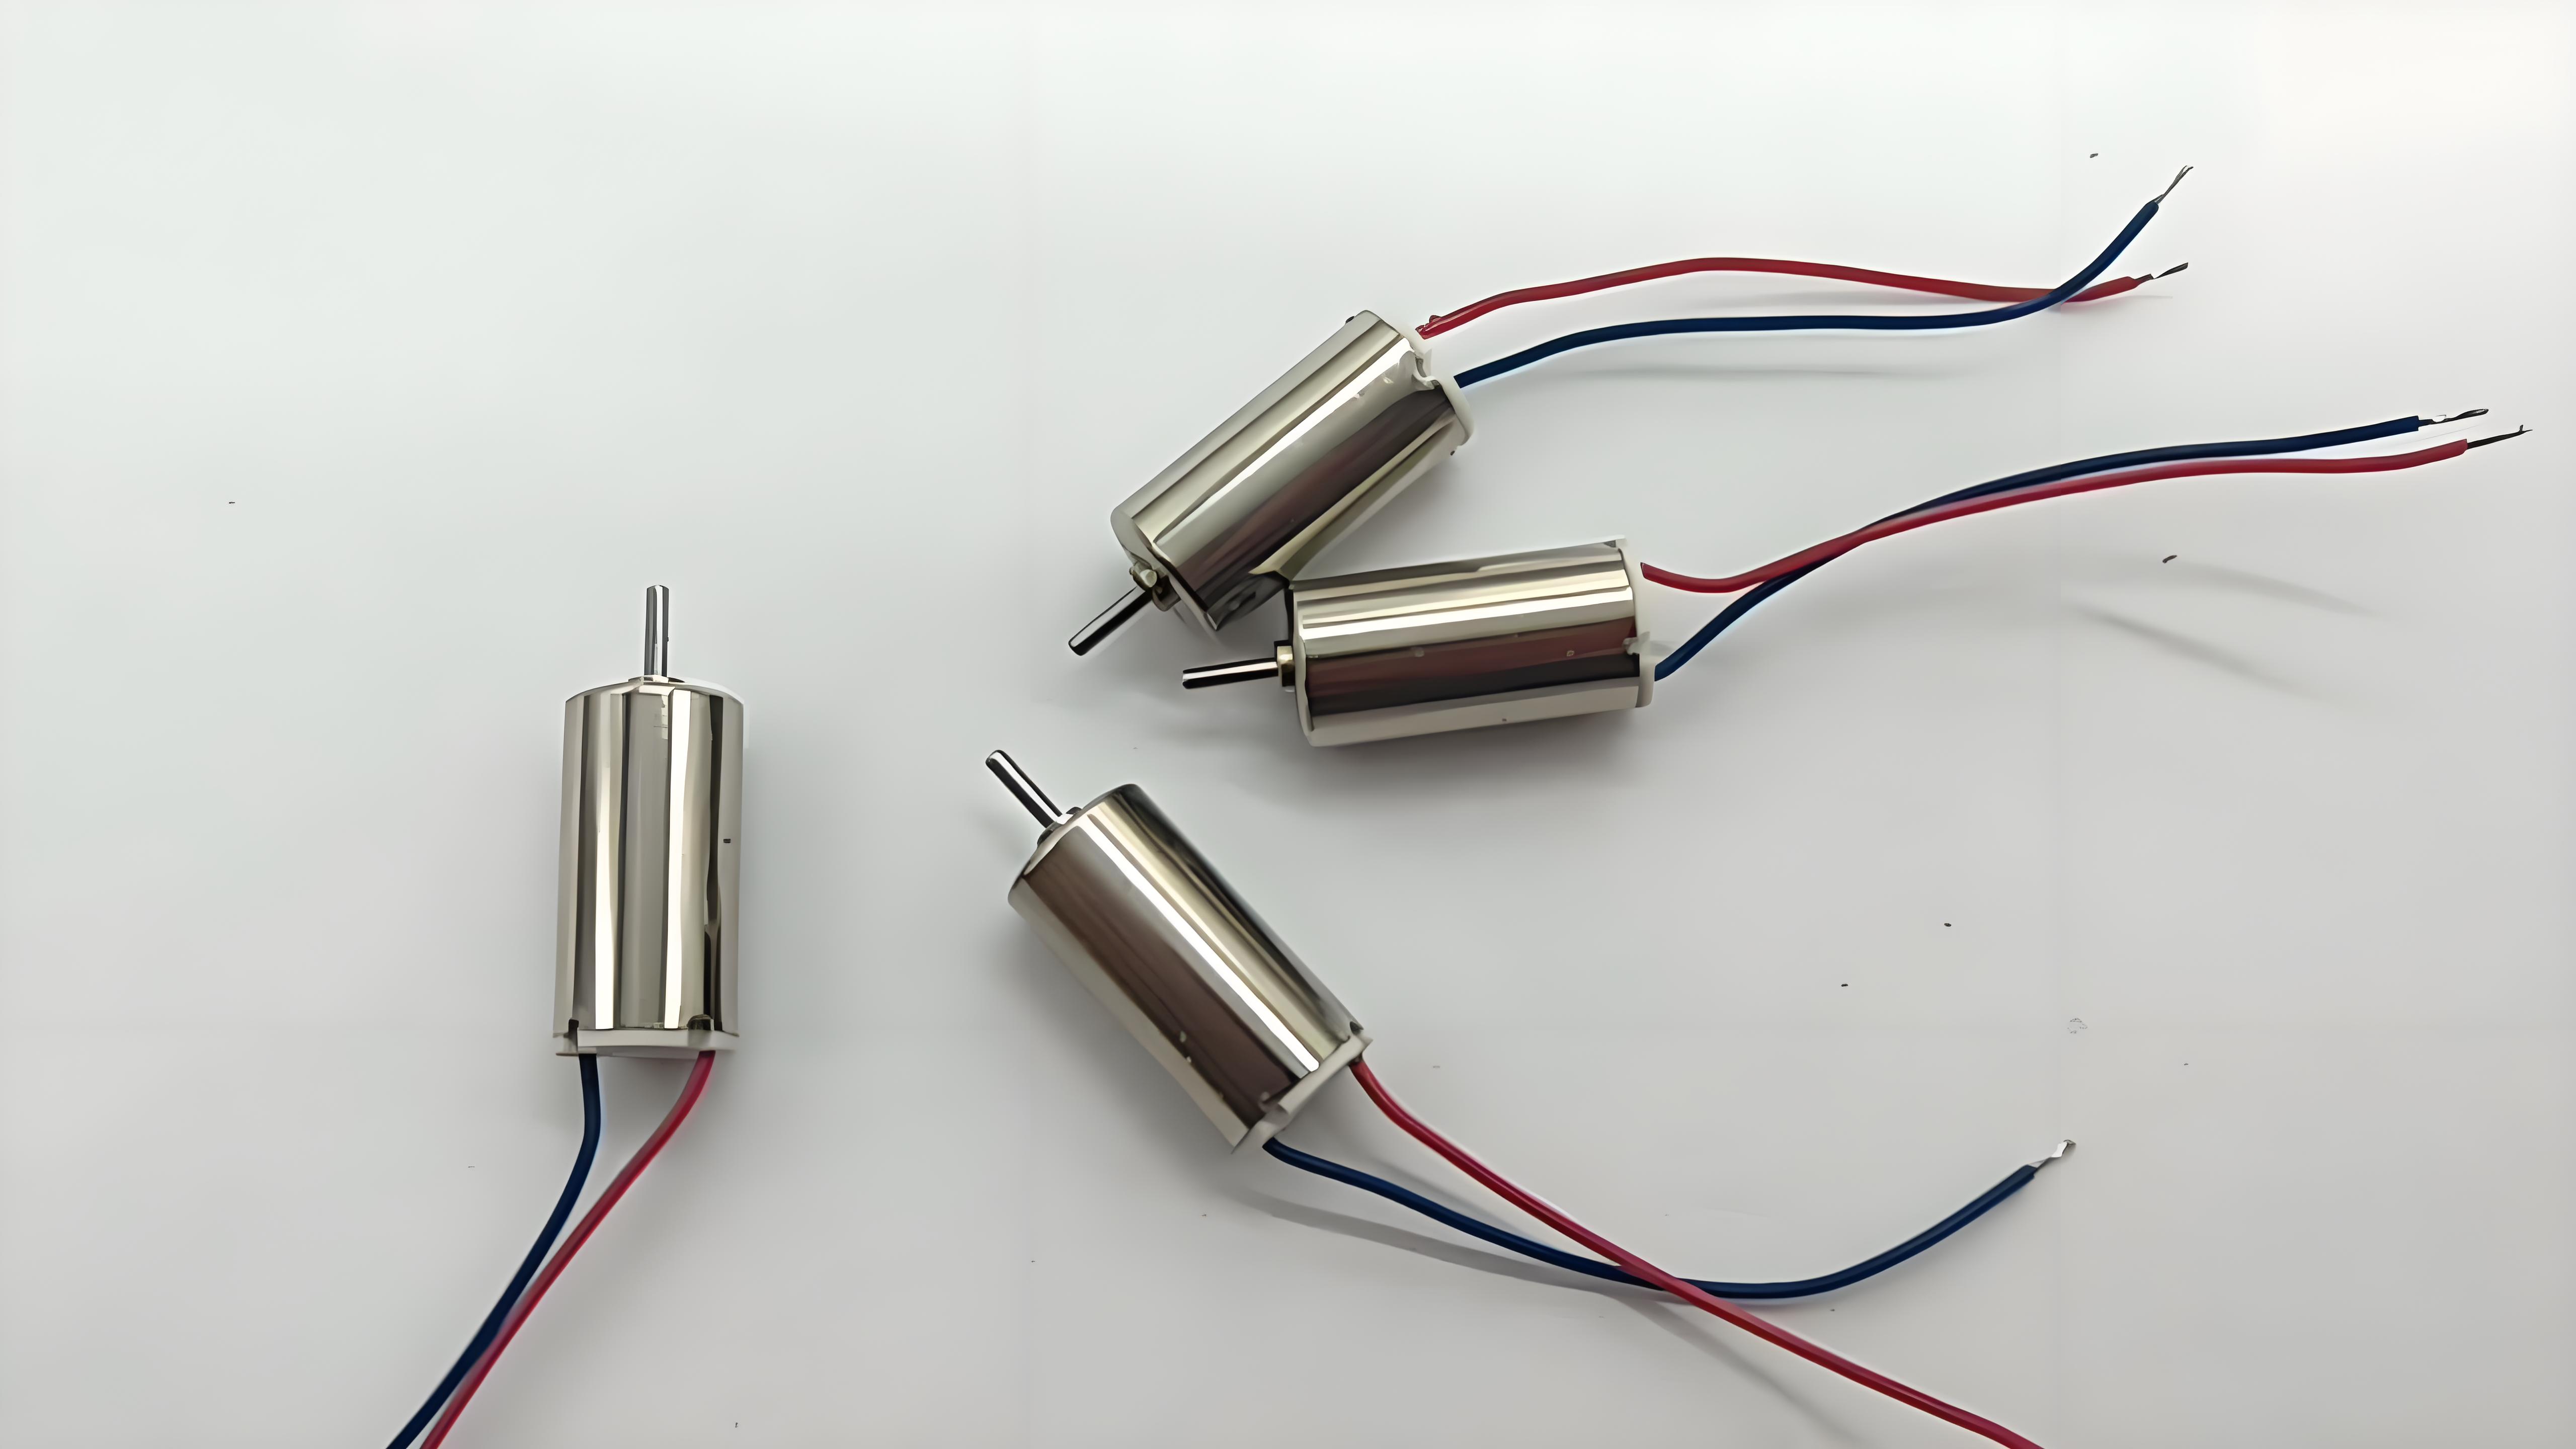 The Application of NdFeB Magnets in Micro Motors